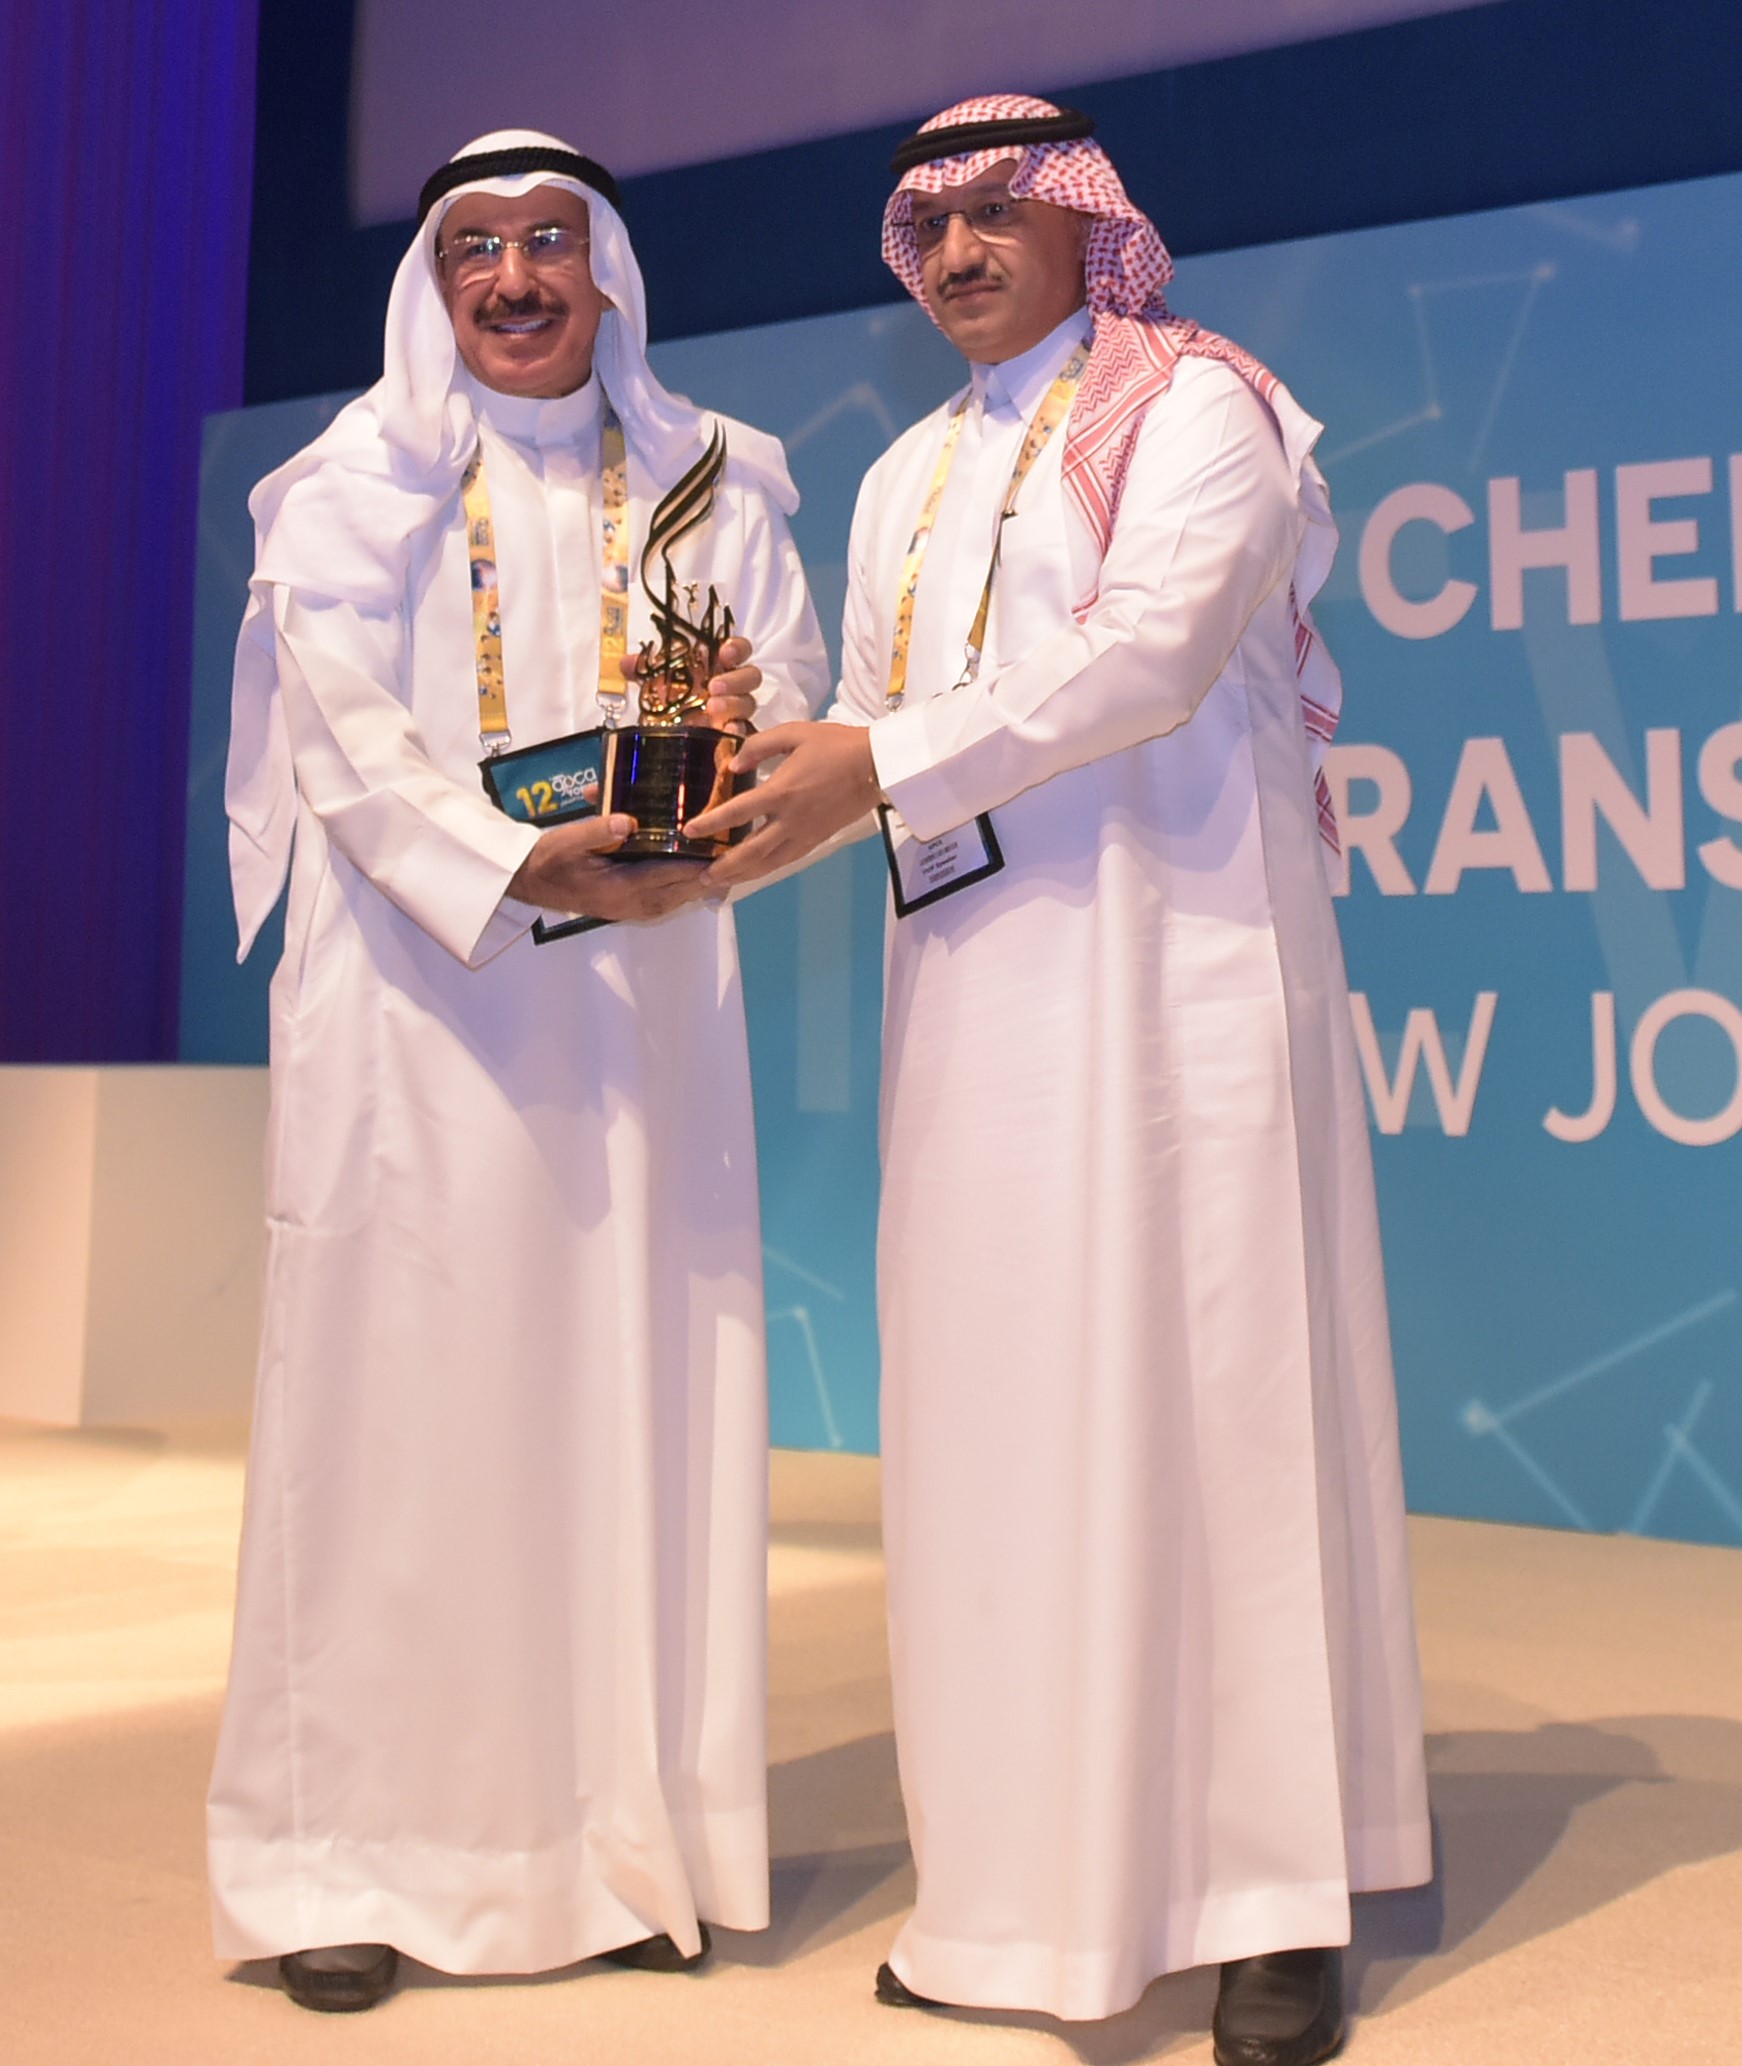 The ceremony of The Gulf Petrochemicals and Chemicals Association (GPCA) awards